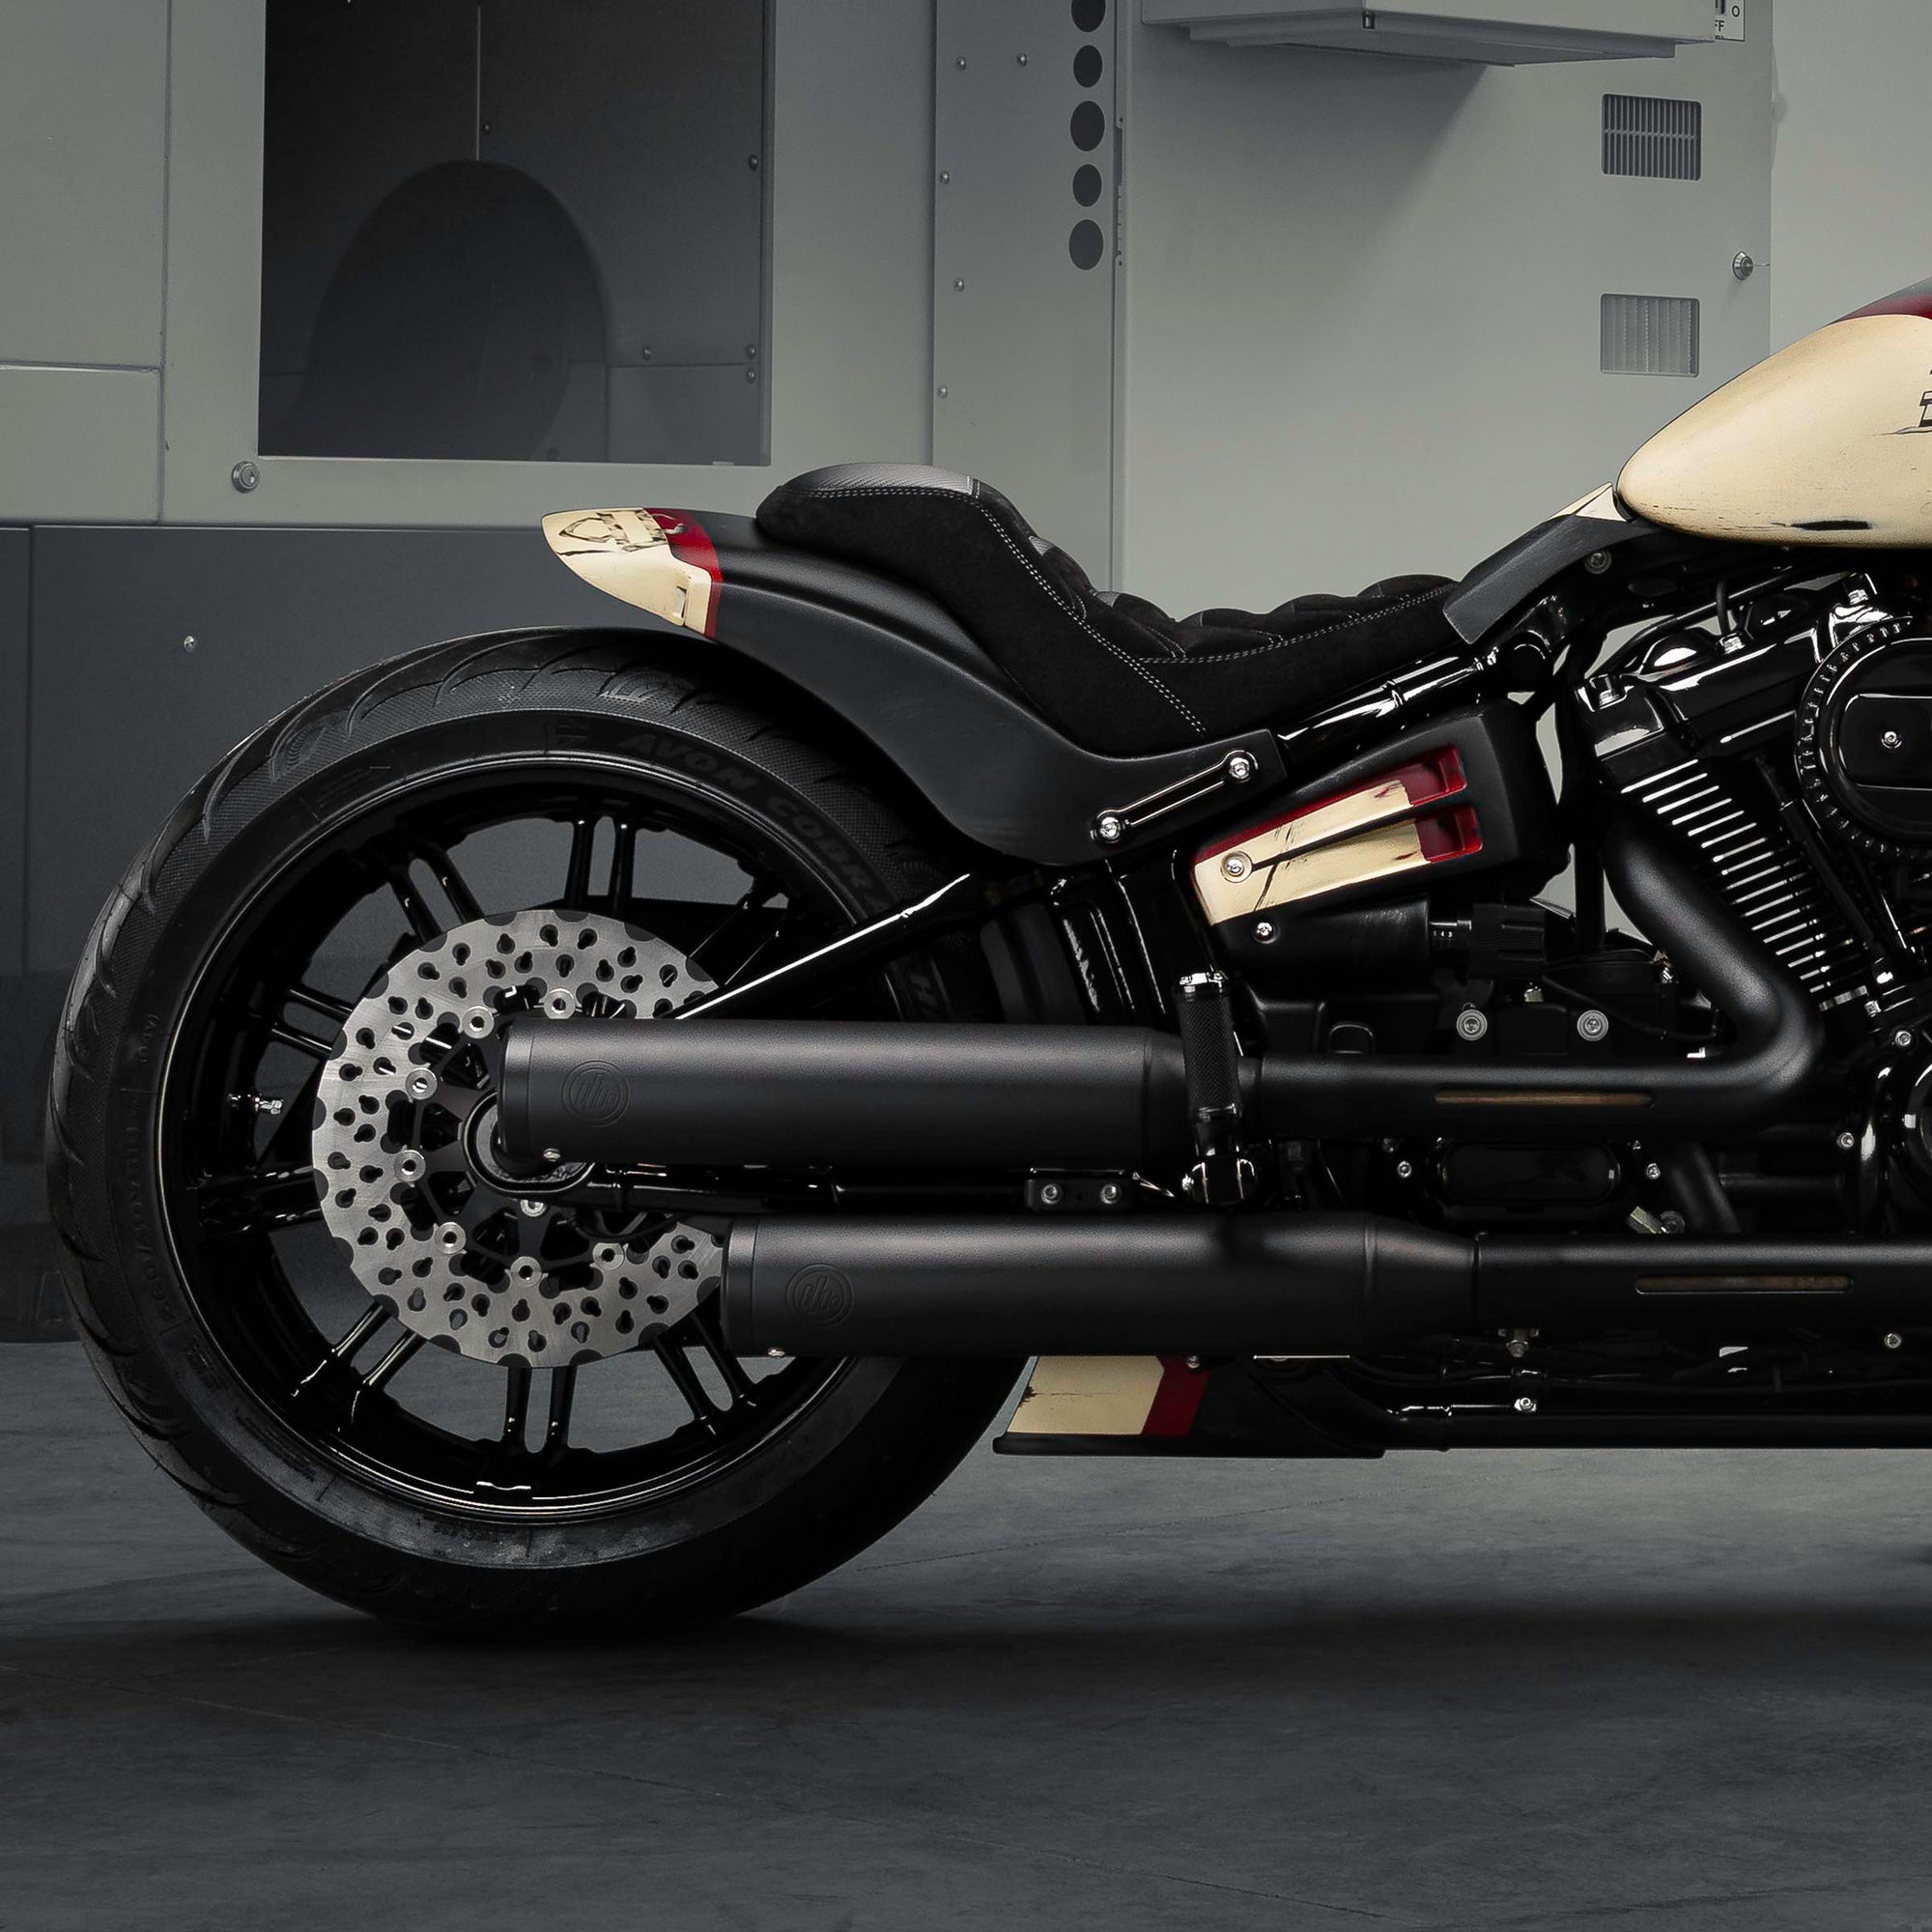 Zoomed Harley Davidson Breakout motorcycle with Killer Custom parts from the side in a modern bike shop